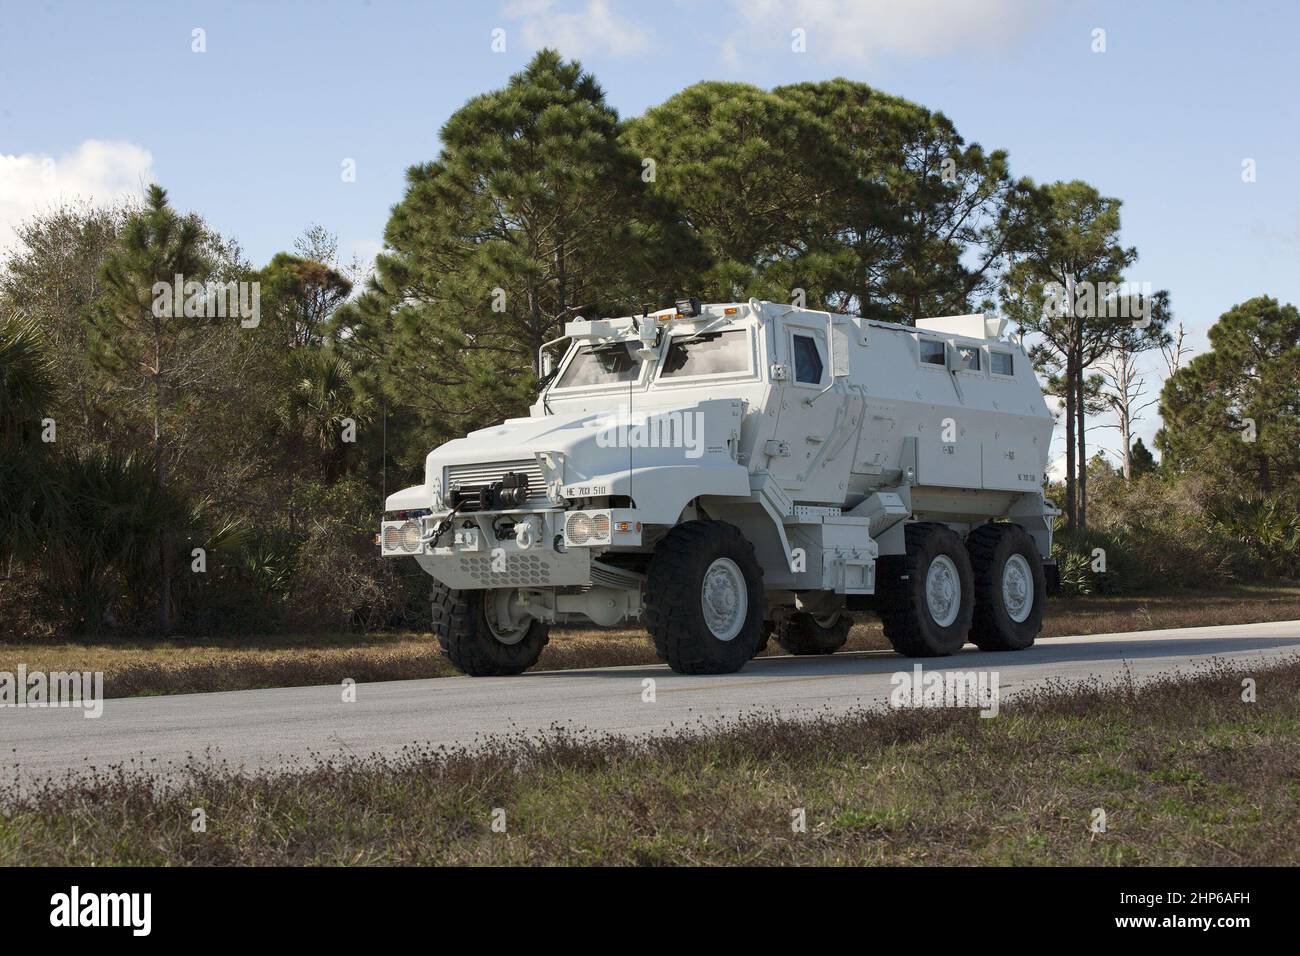 One of four new emergency egress vehicles, called Mine-Resistant Ambush-Protection, or MRAP, vehicles is driven to the Maintenance and Operations Facility at Kennedy Space Center in Florida ca. 2014 Stock Photo